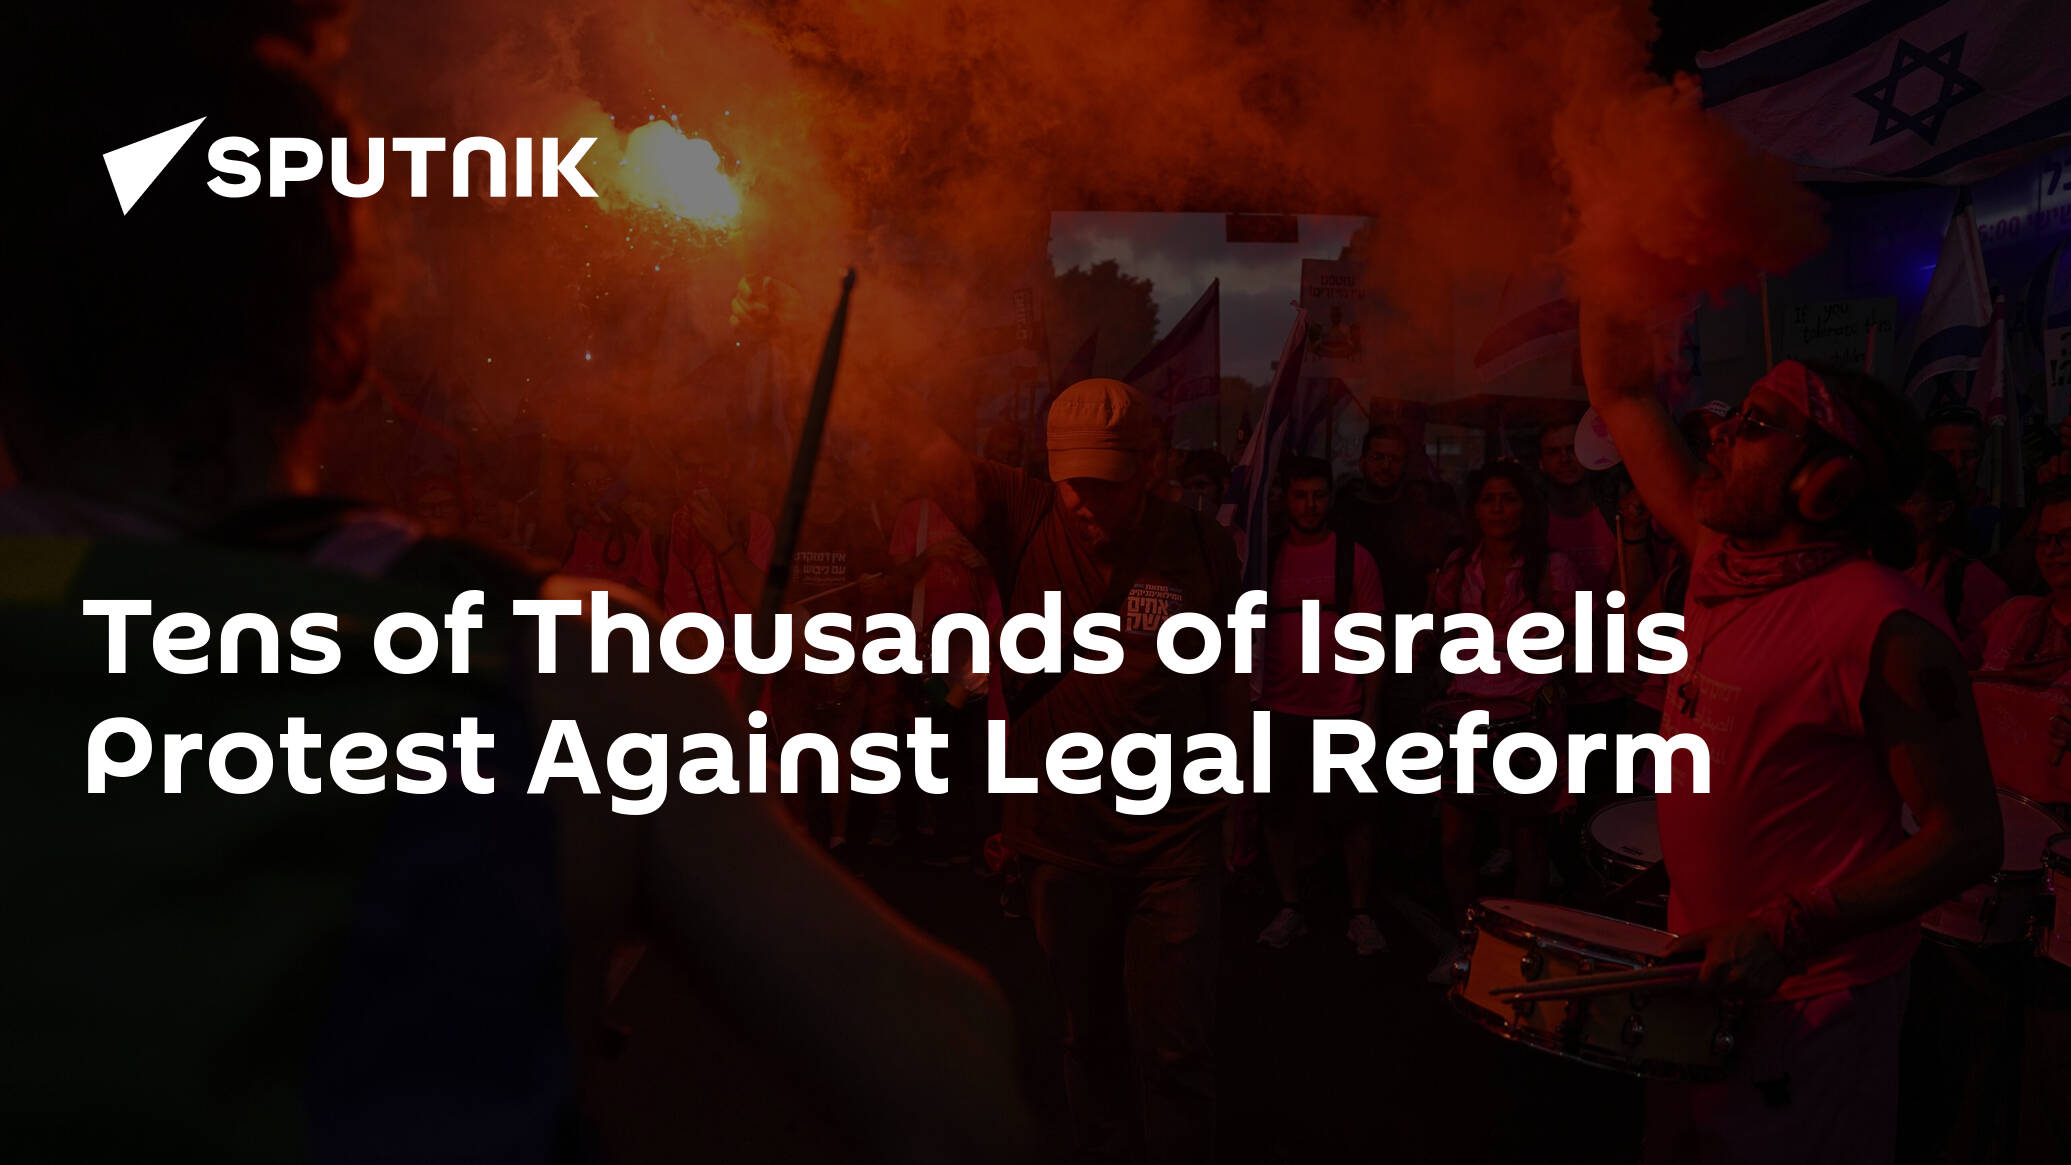 Tens of Thousands of Israelis Protest Against Legal Reform